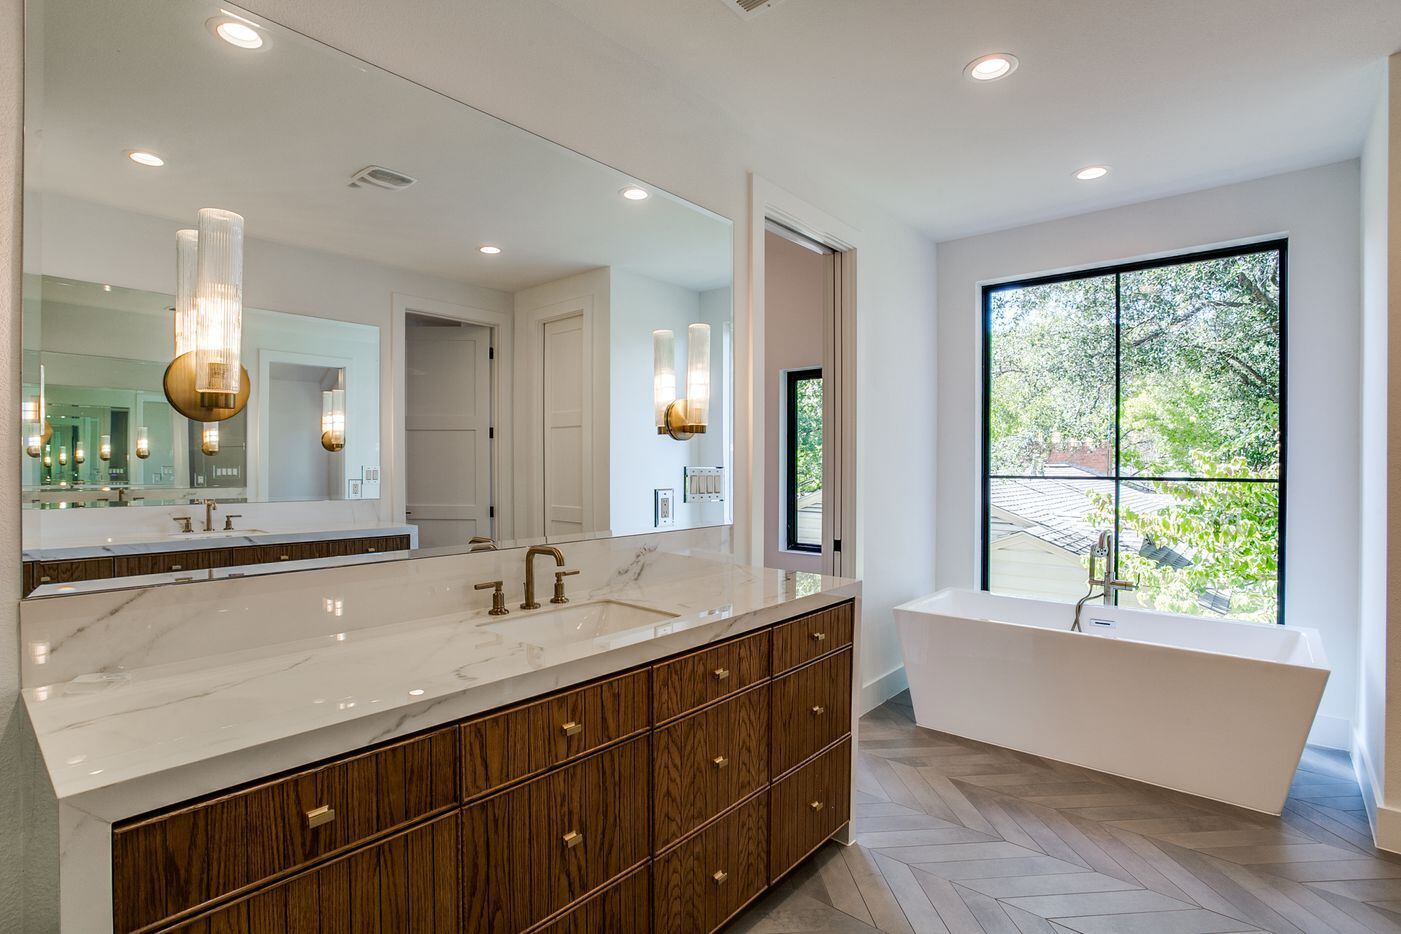 The master bath also features a soaking tub.